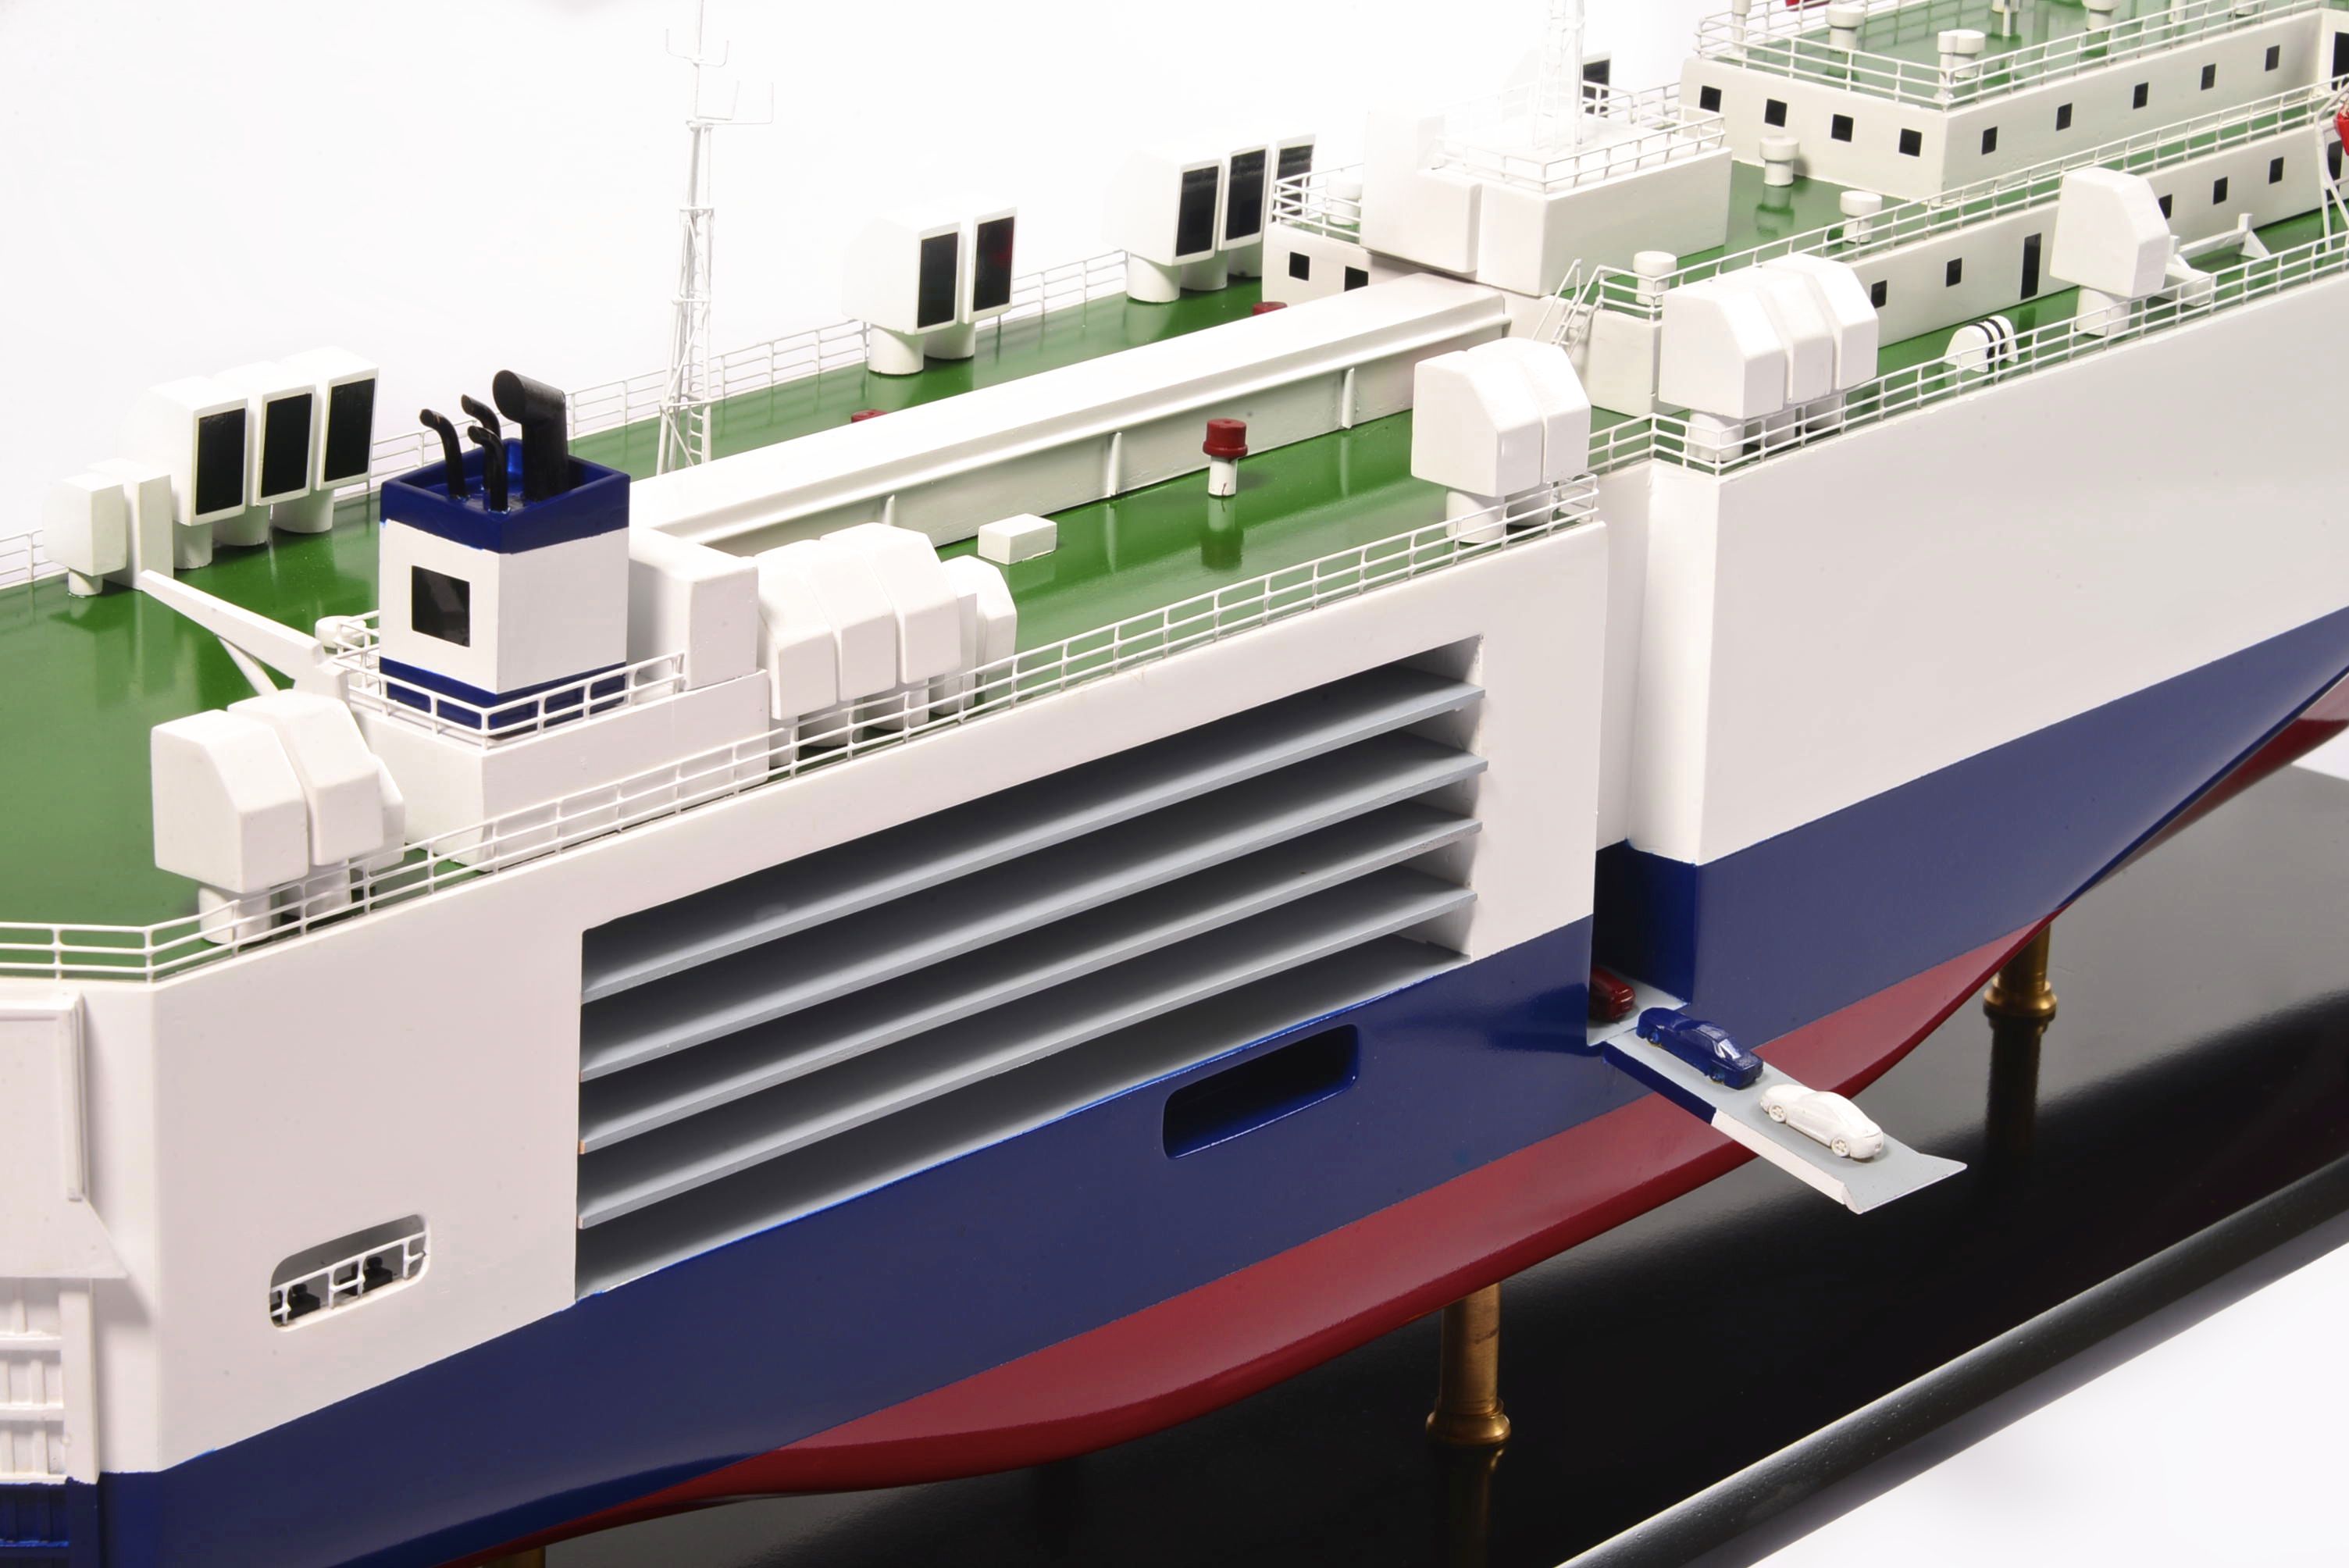 New Century 1 Vehicle Carrier Model Ship